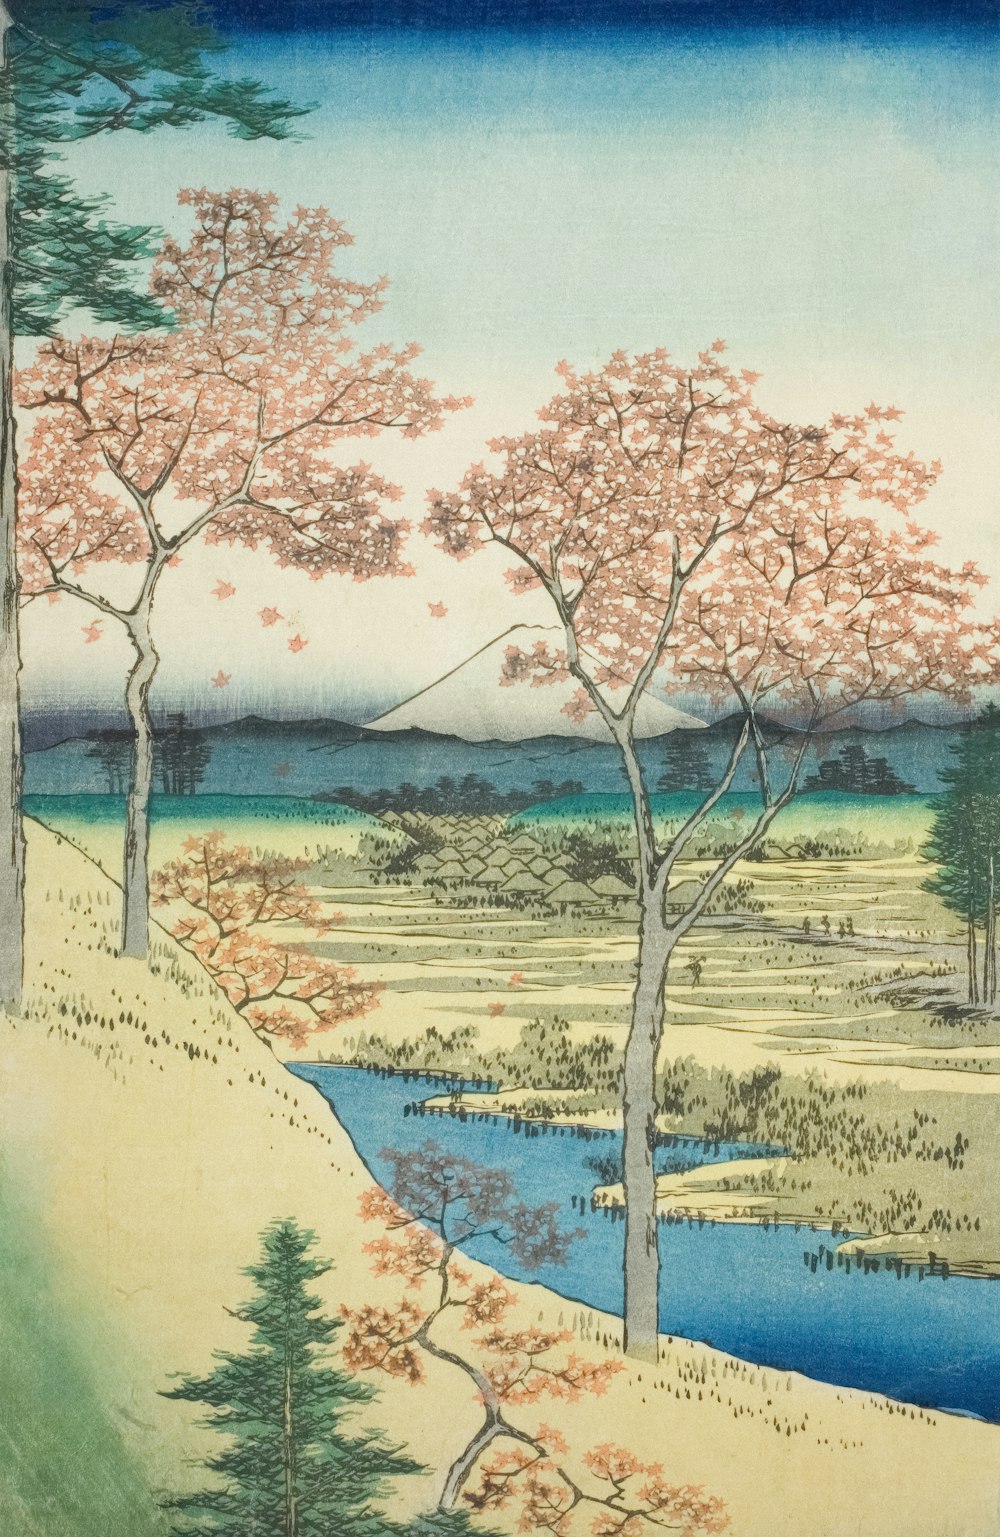 a painting of a landscape with trees and water